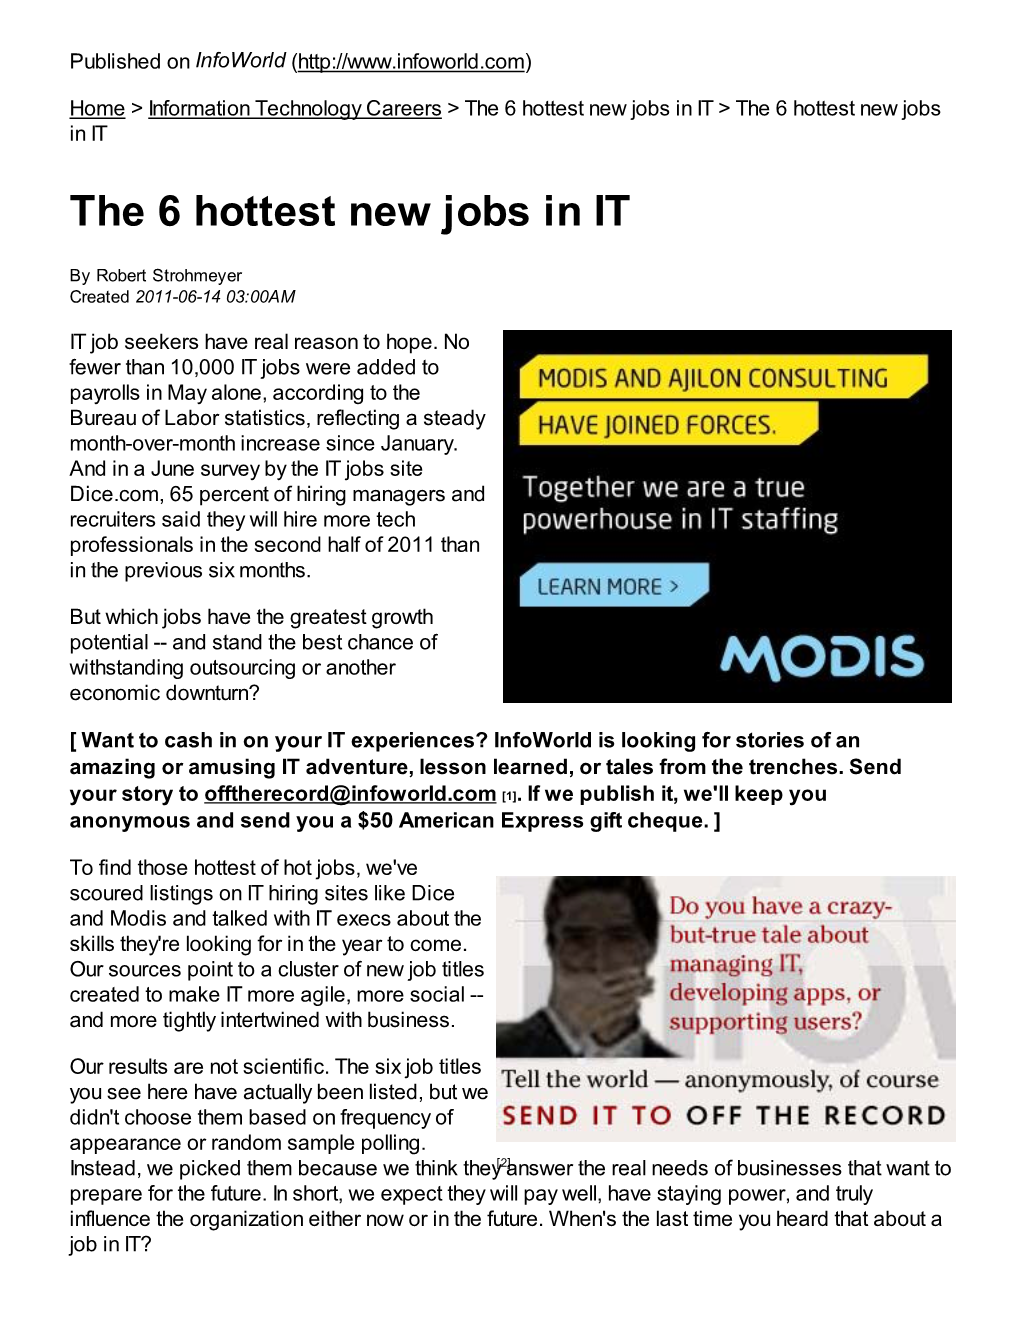 The 6 Hottest New Jobs in IT > the 6 Hottest New Jobs in IT